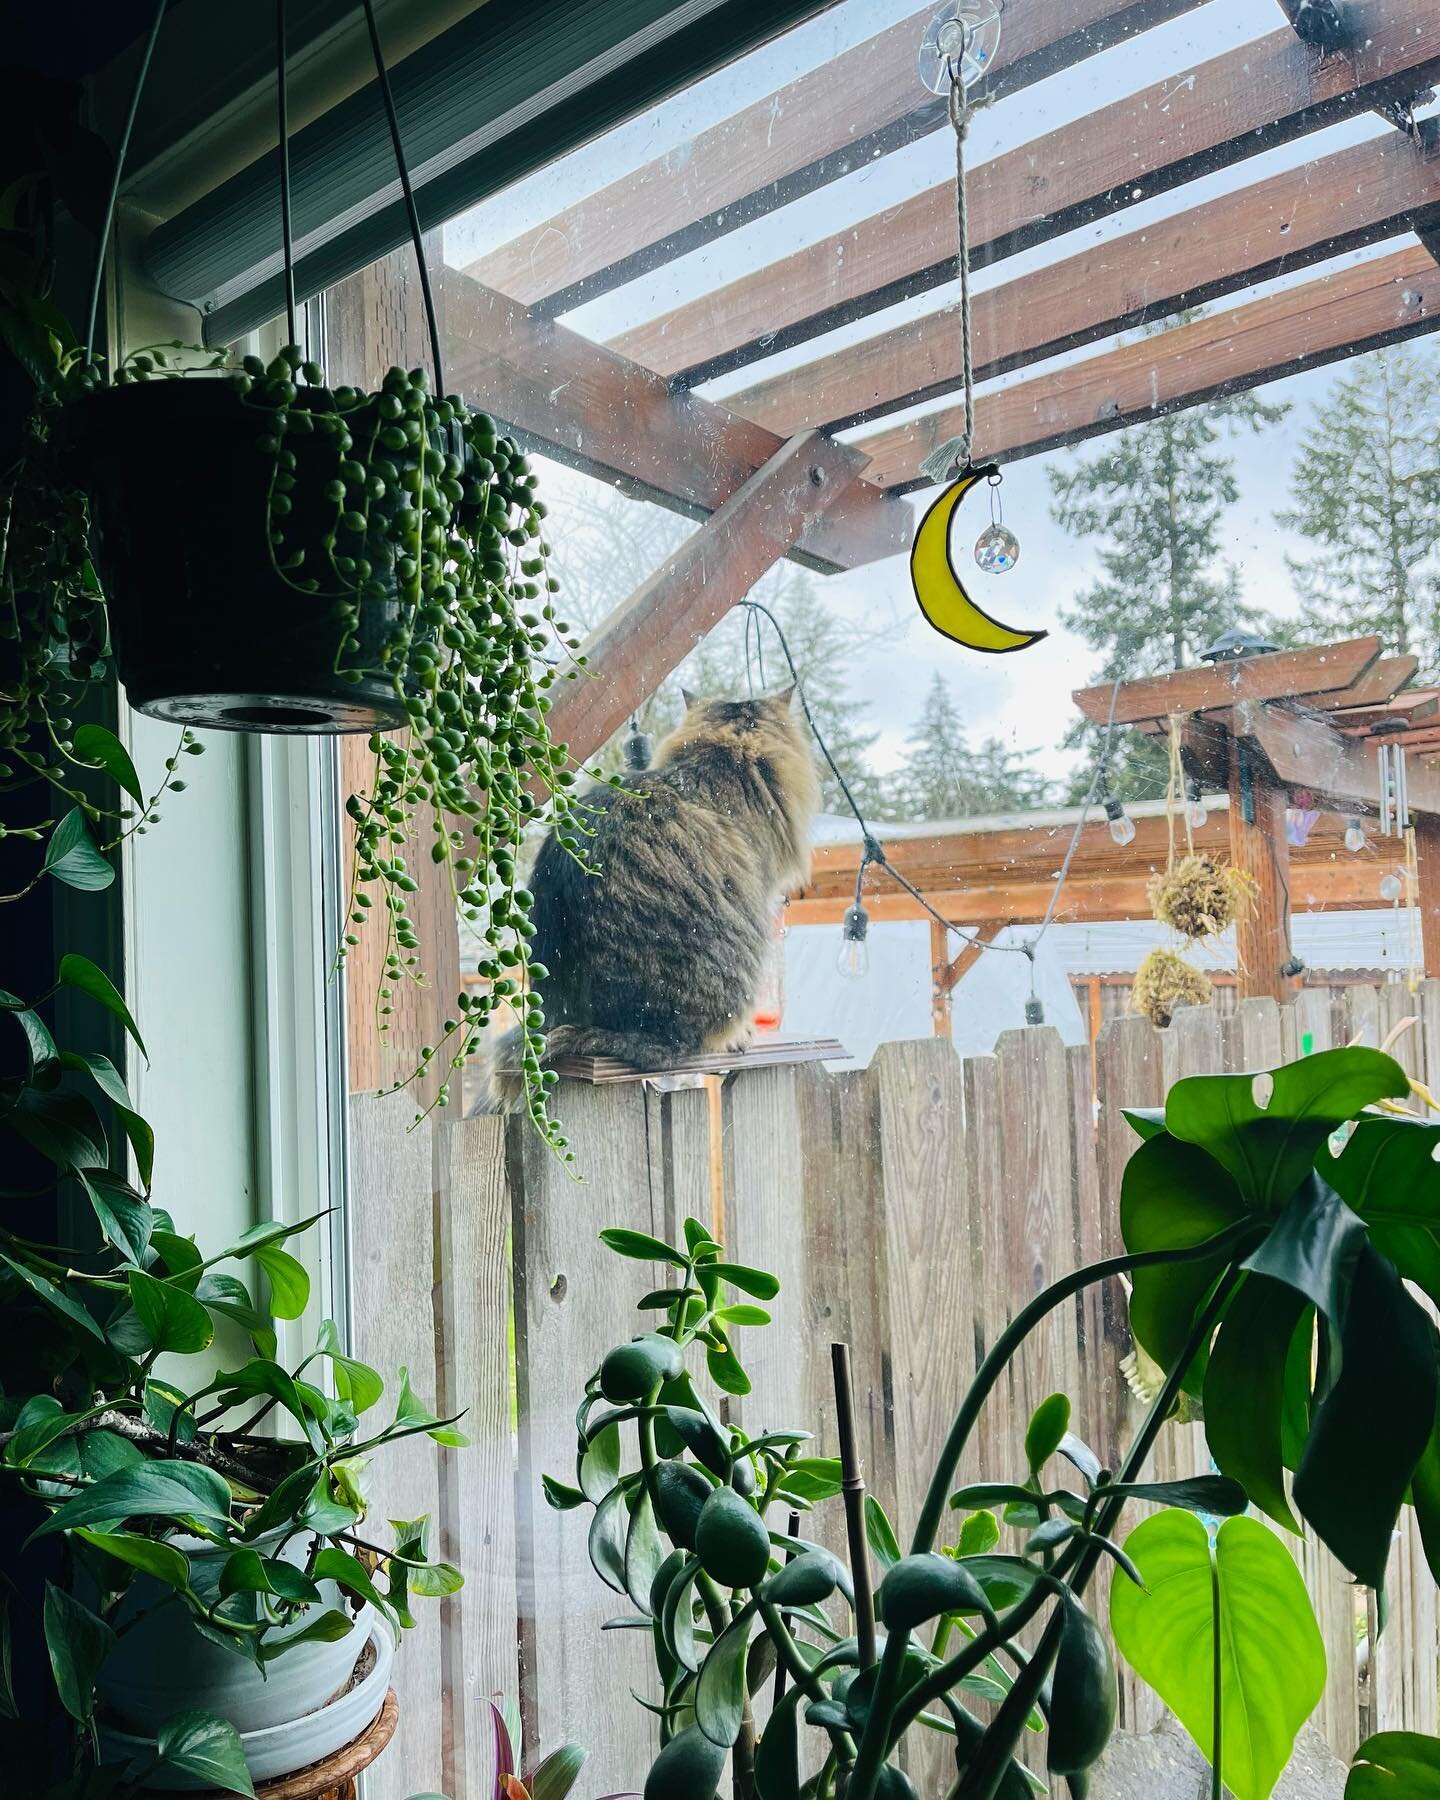 Guard Cat. I put this platform up for him to help when he climbs over the fence, and he likes to sit on it because it is a good view of the entire property and a view into the home to communicate to me. Good job Buddy Bean. [ID: view out a kitchen wi